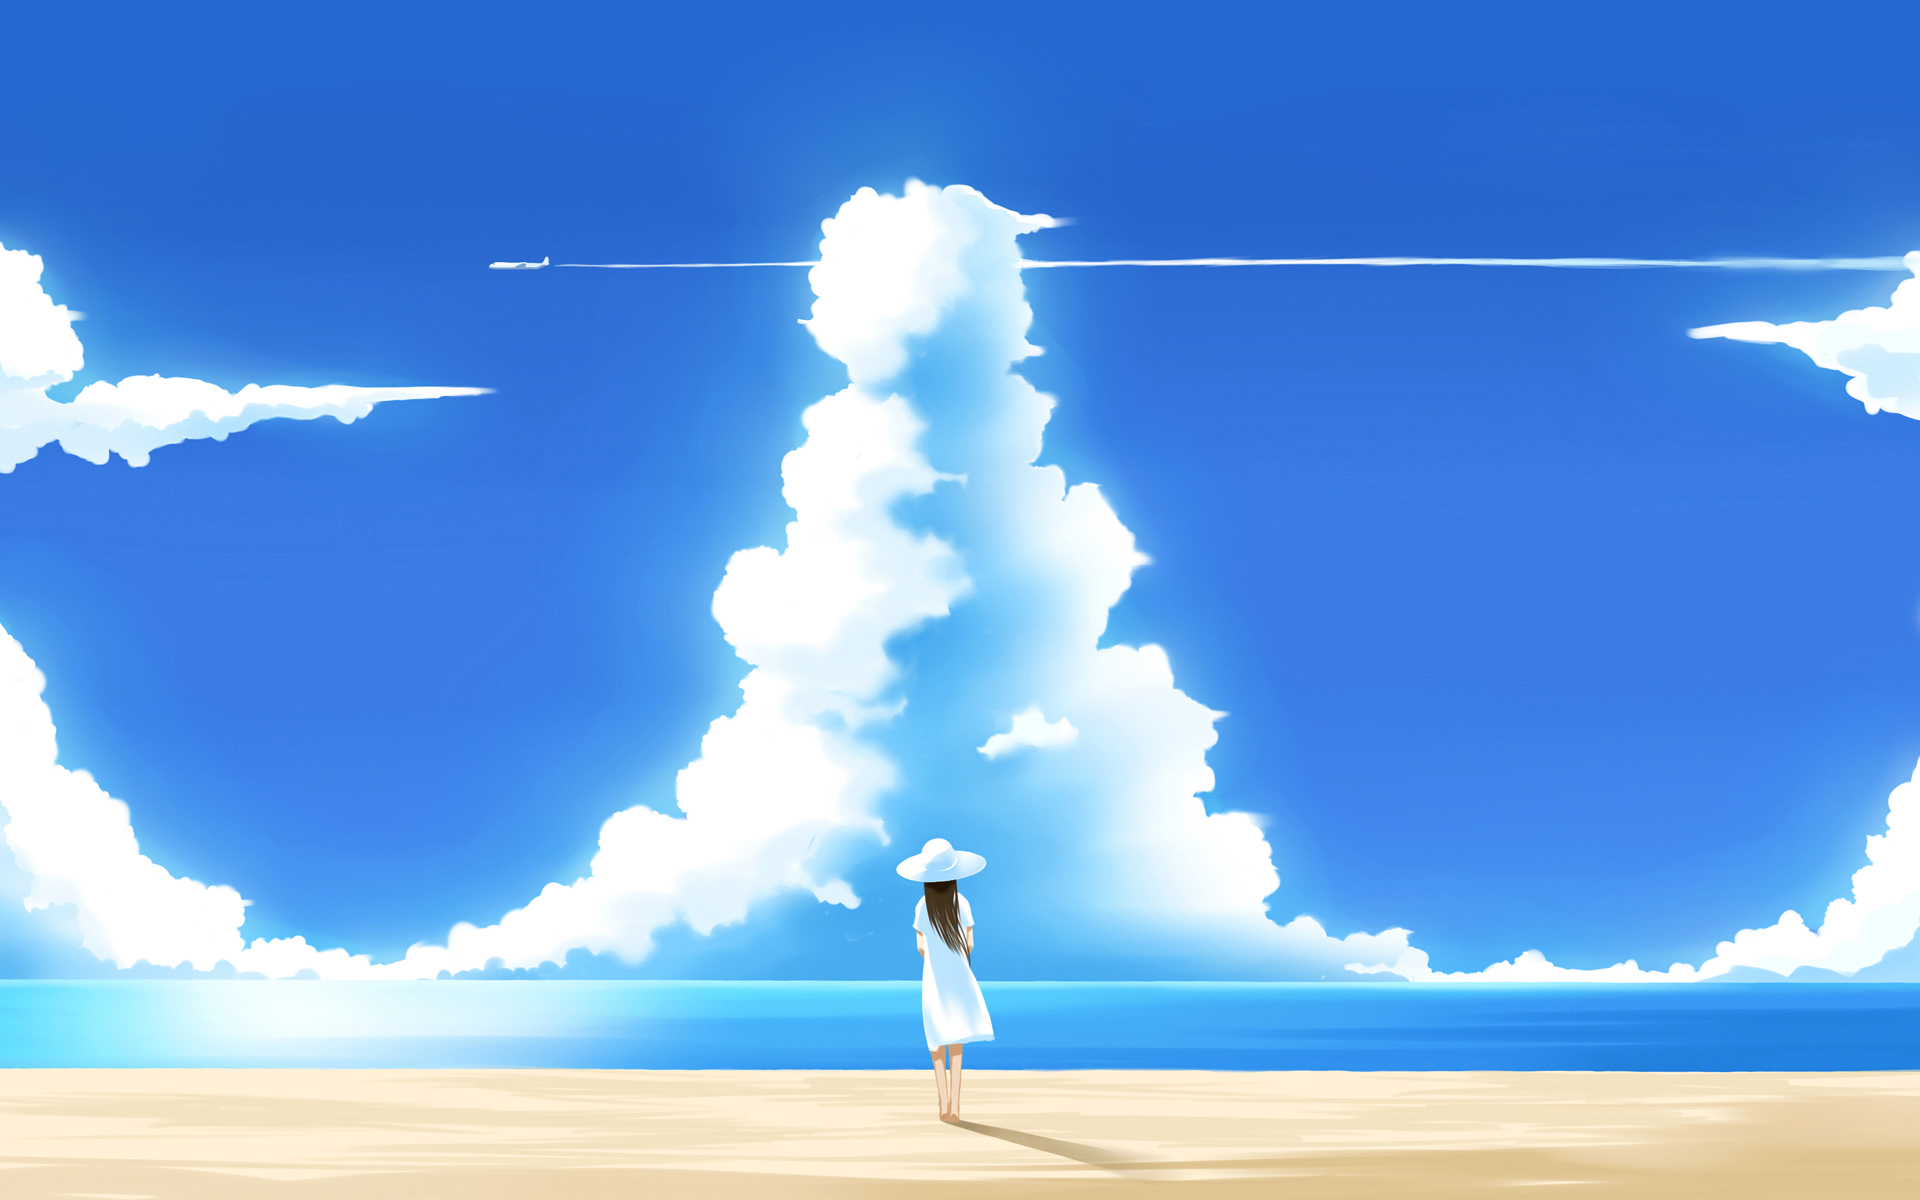 Anime Beach Background Images Pictures   Becuo